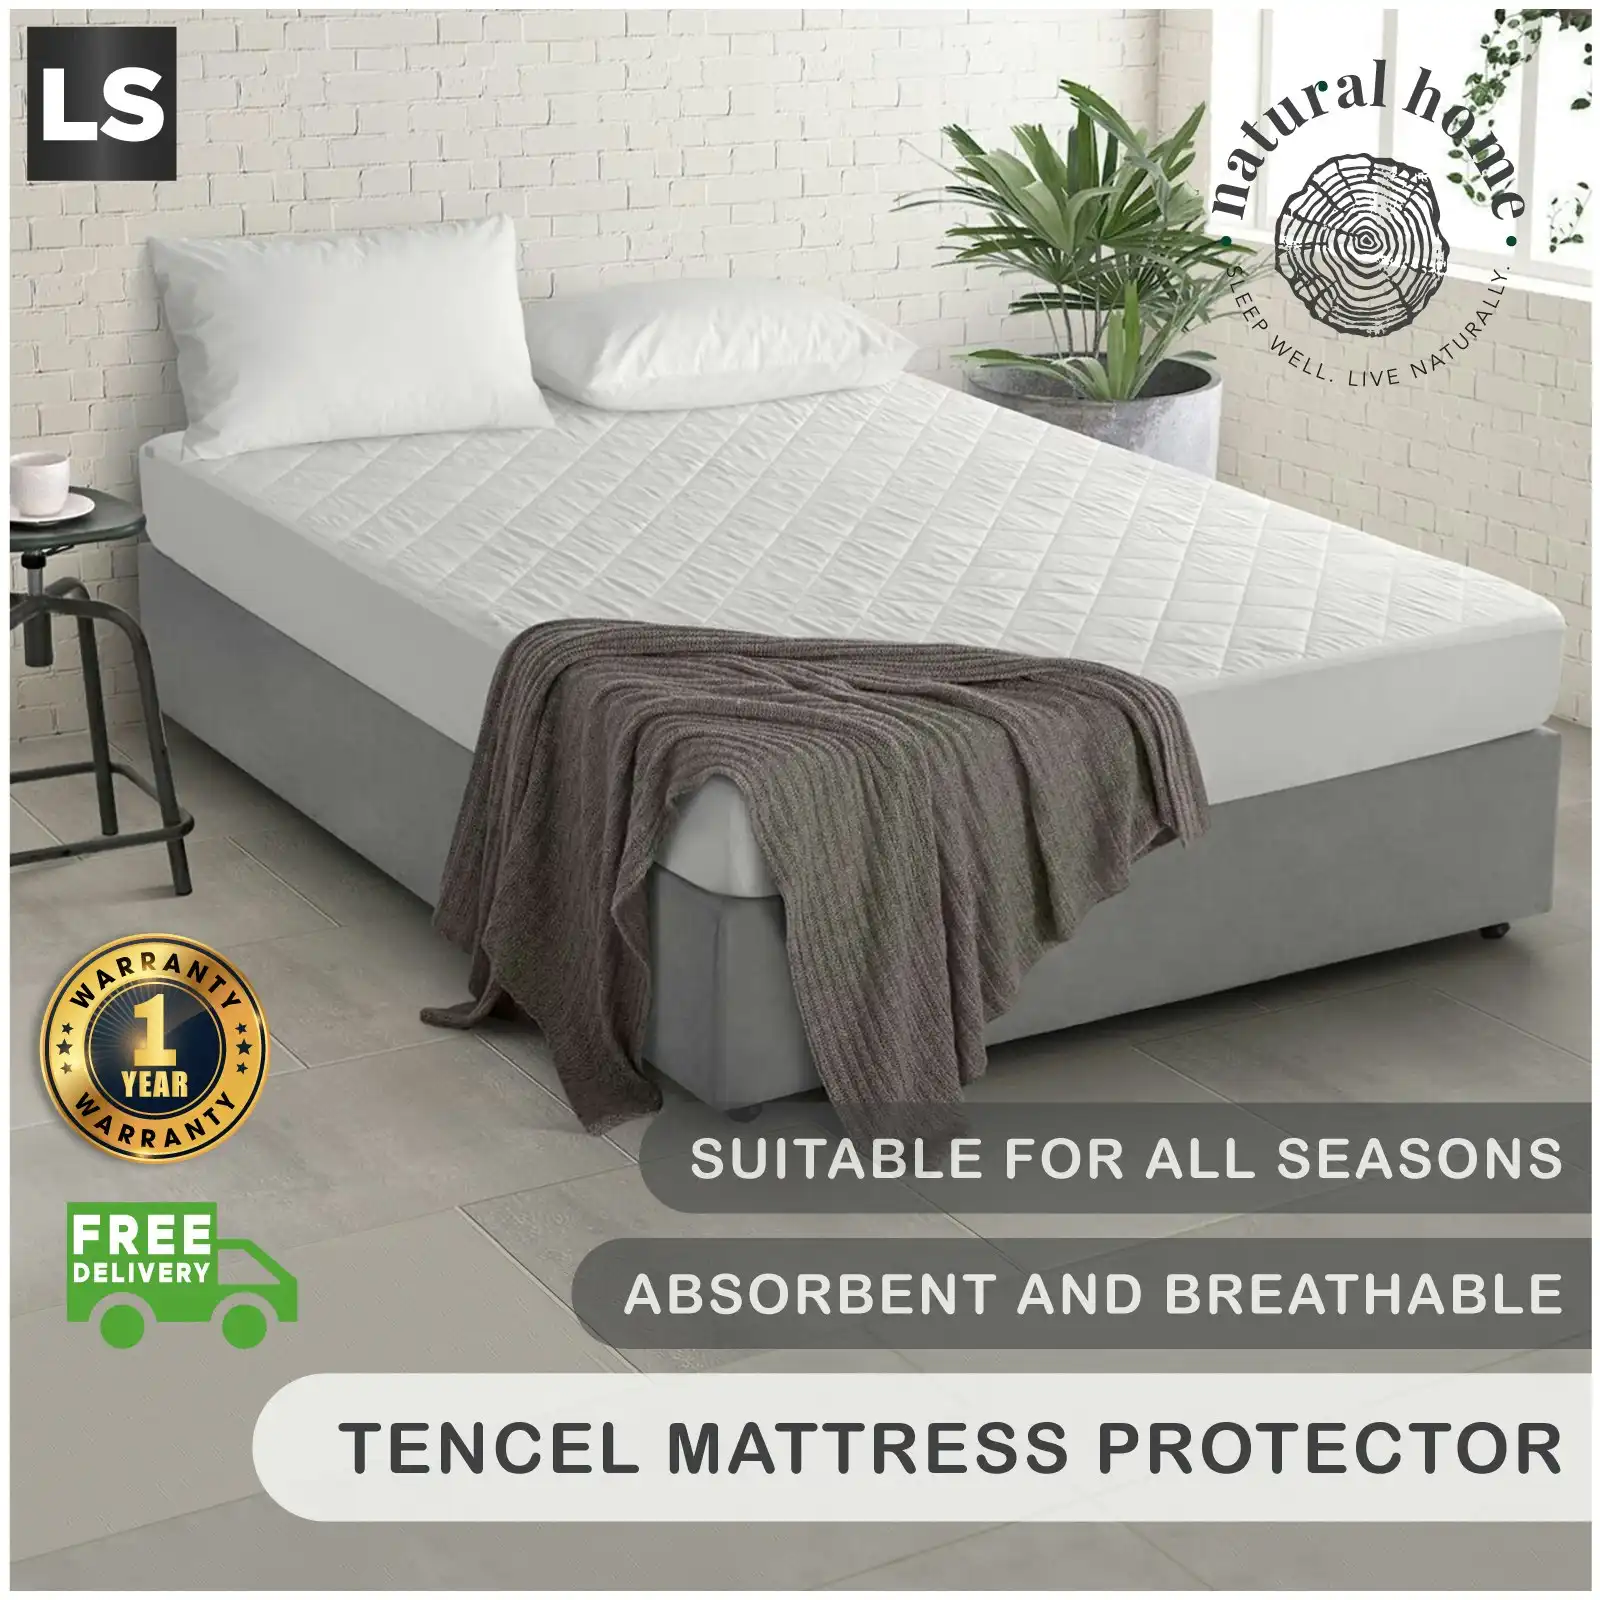 Natural Home Tencel Quilted Mattress Protector White Long Single Bed